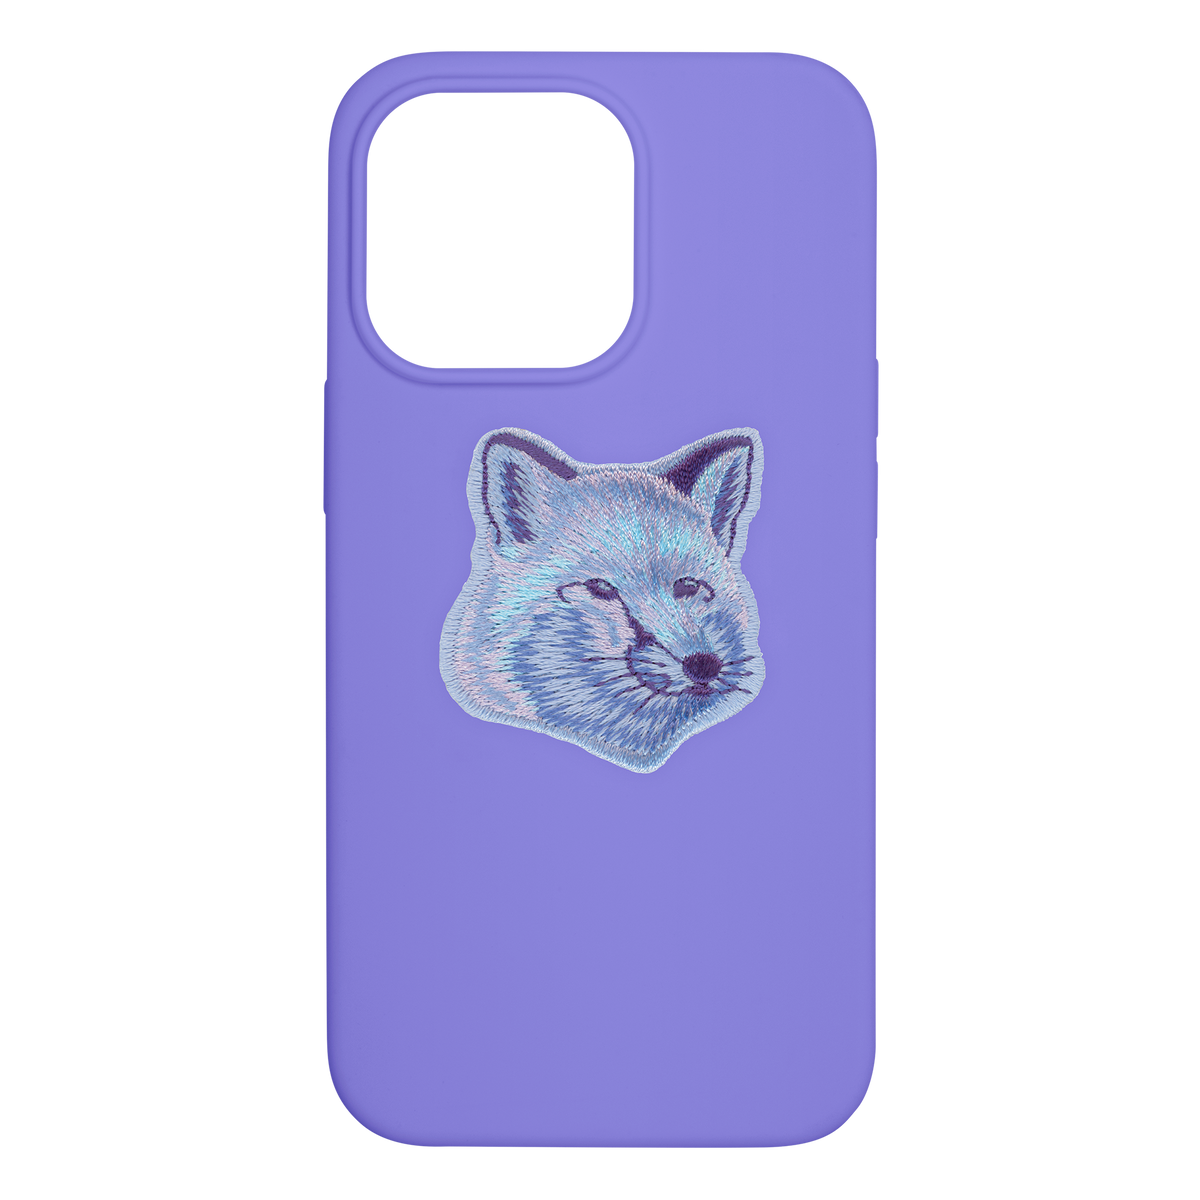 39639197155467,Cool-Tone Fox Head Case for iPhone 13 Pro Max - Provencal Blue